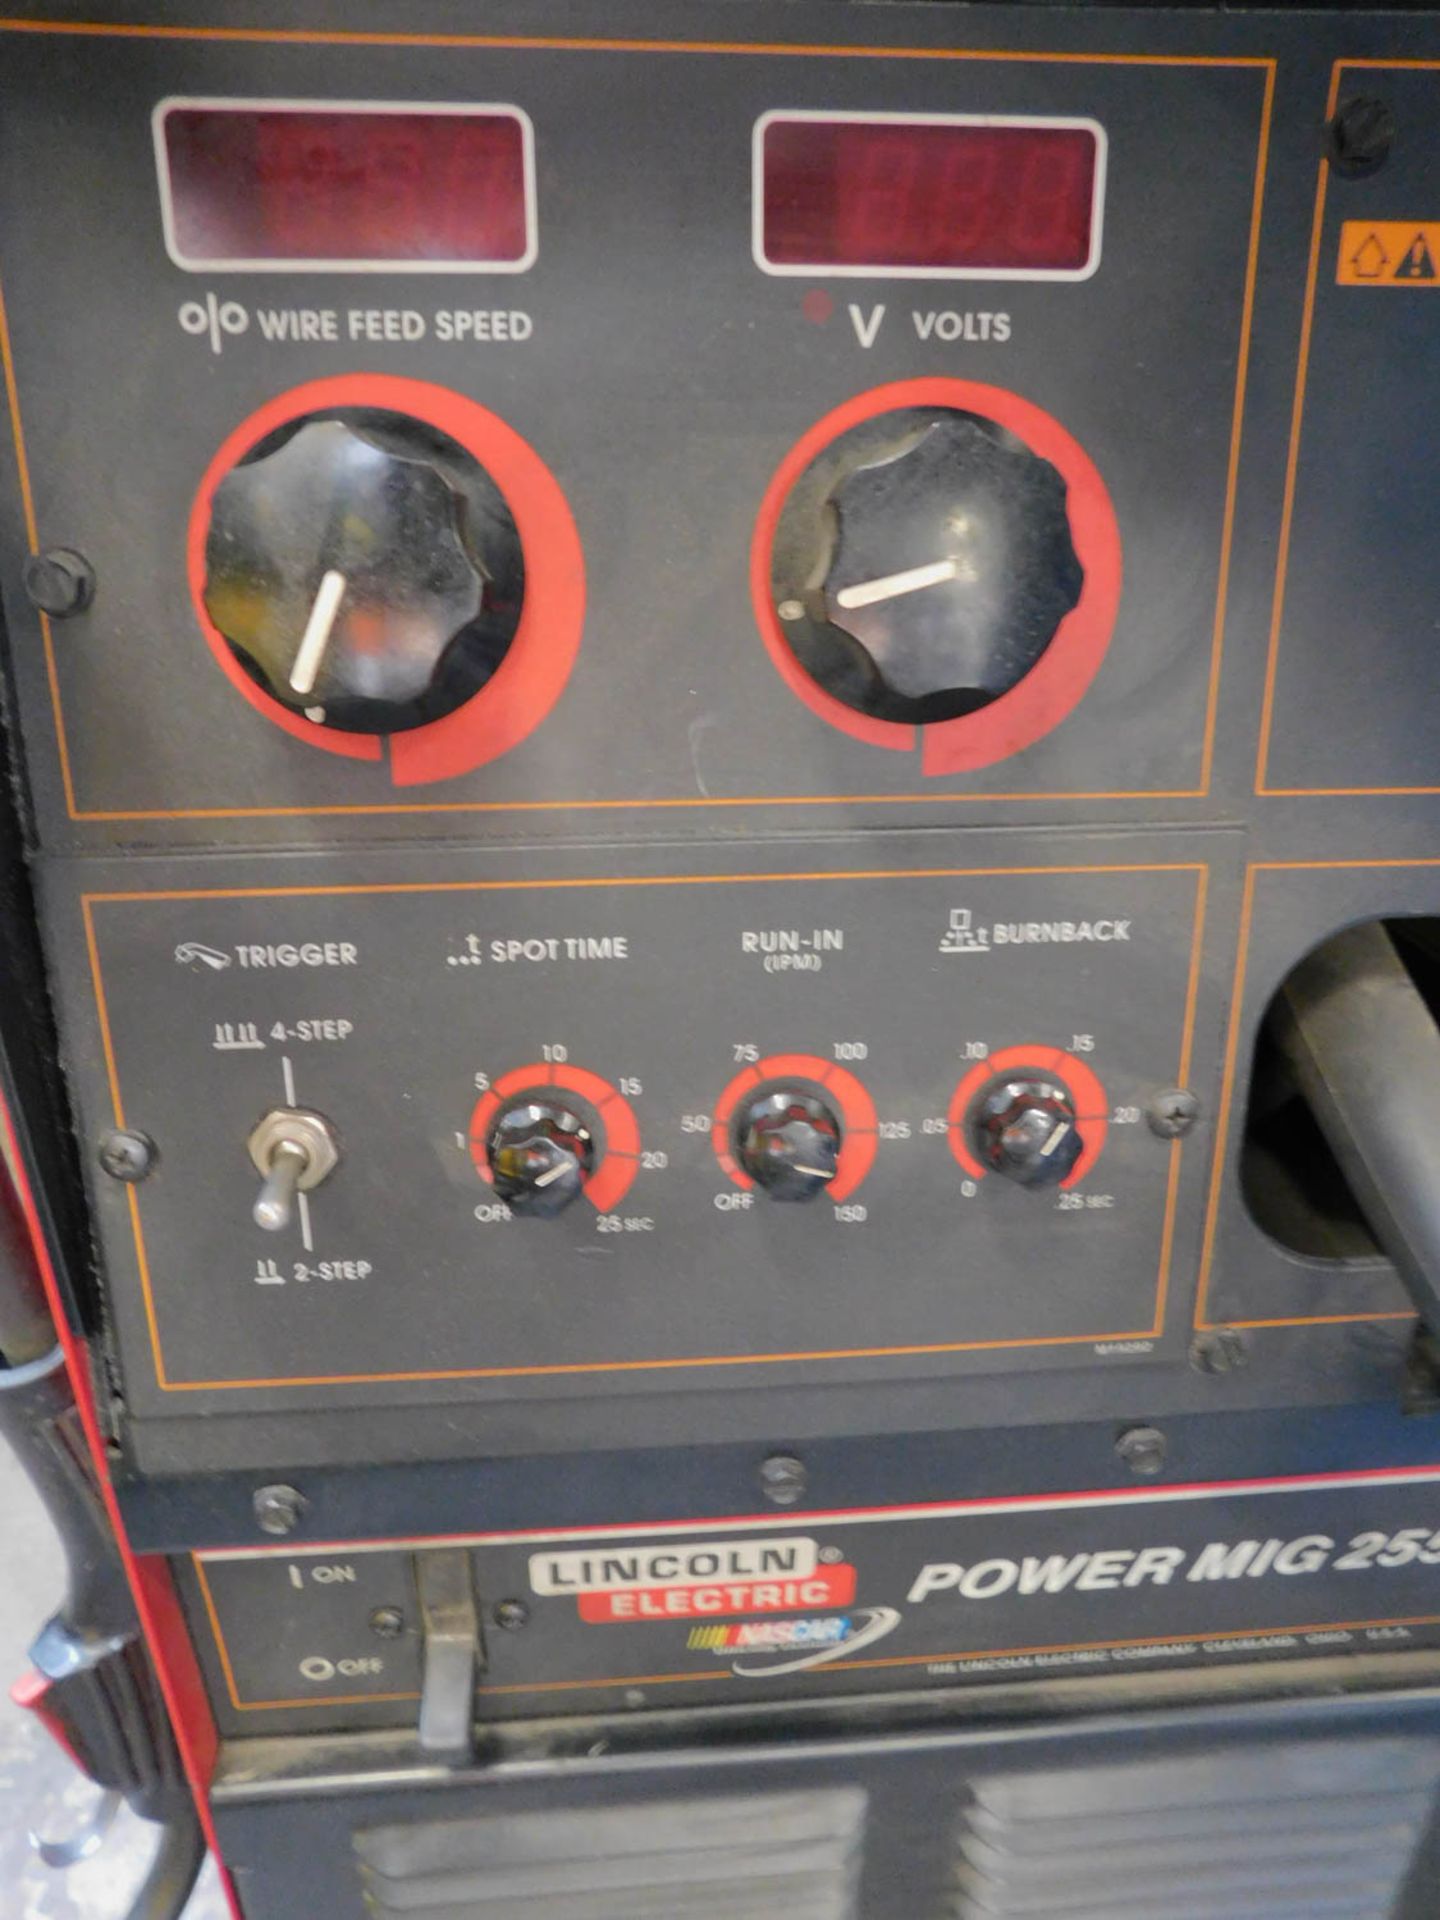 LINCOLN ELECTRIC POWER MIG 255 WELDER, S/N: V1020452858 (NO TANK) - Image 2 of 2